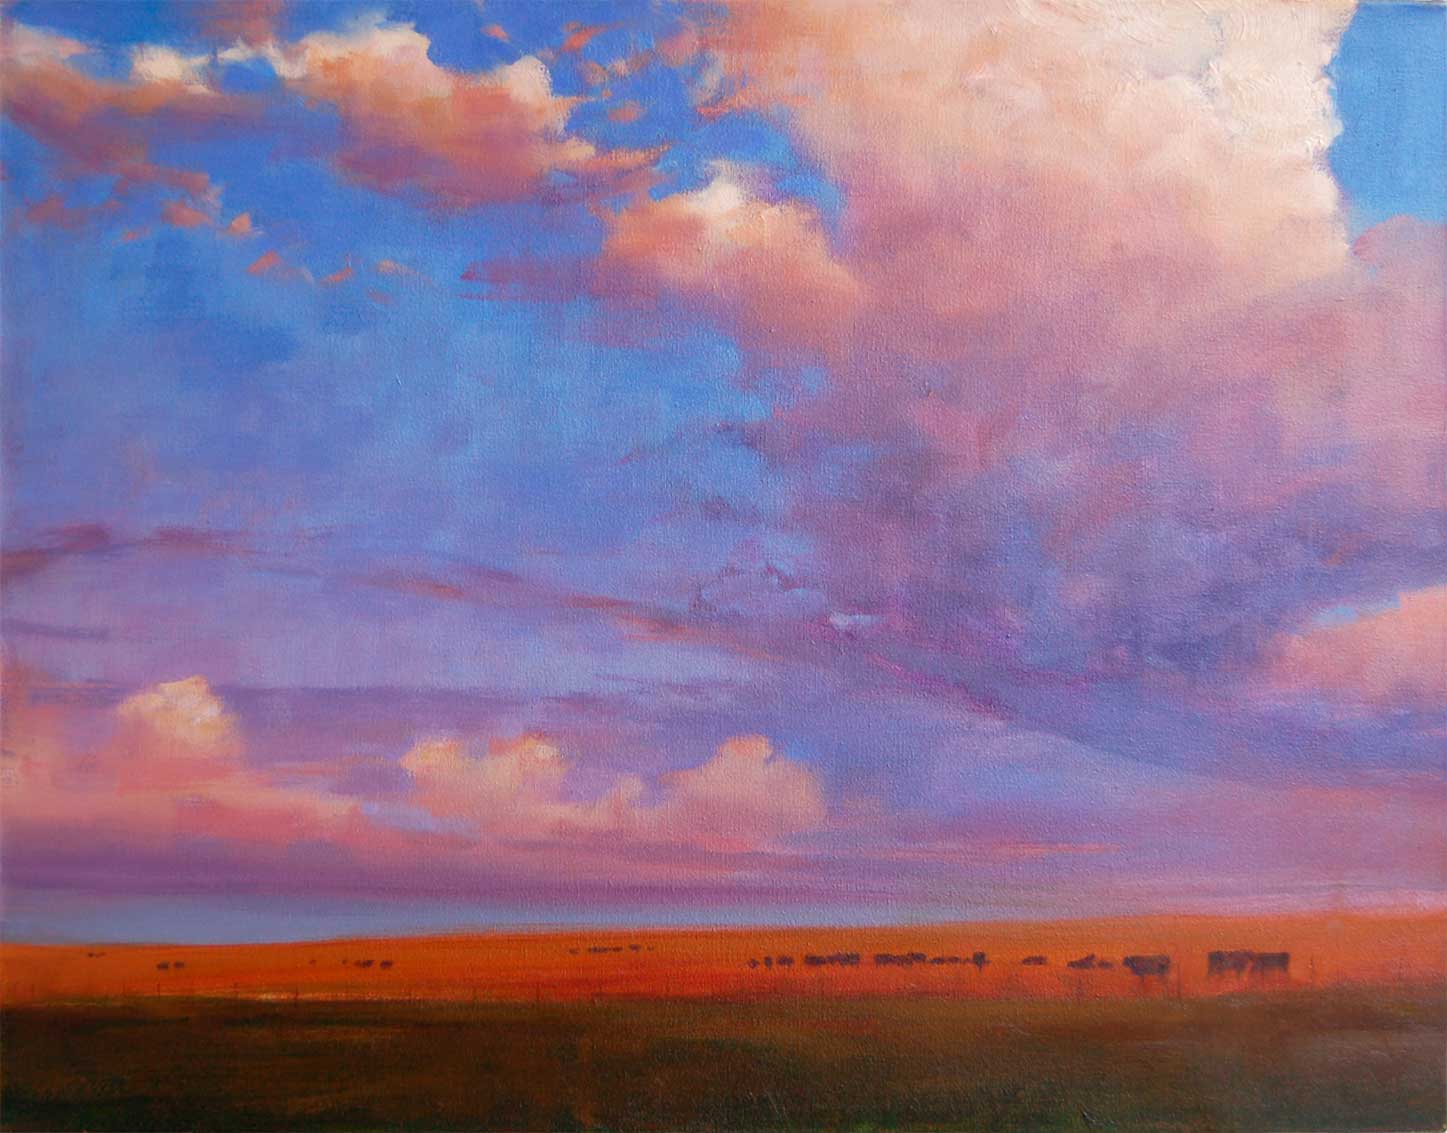 MacLoad, Alberta. 16 X 20 in. oil on canvas